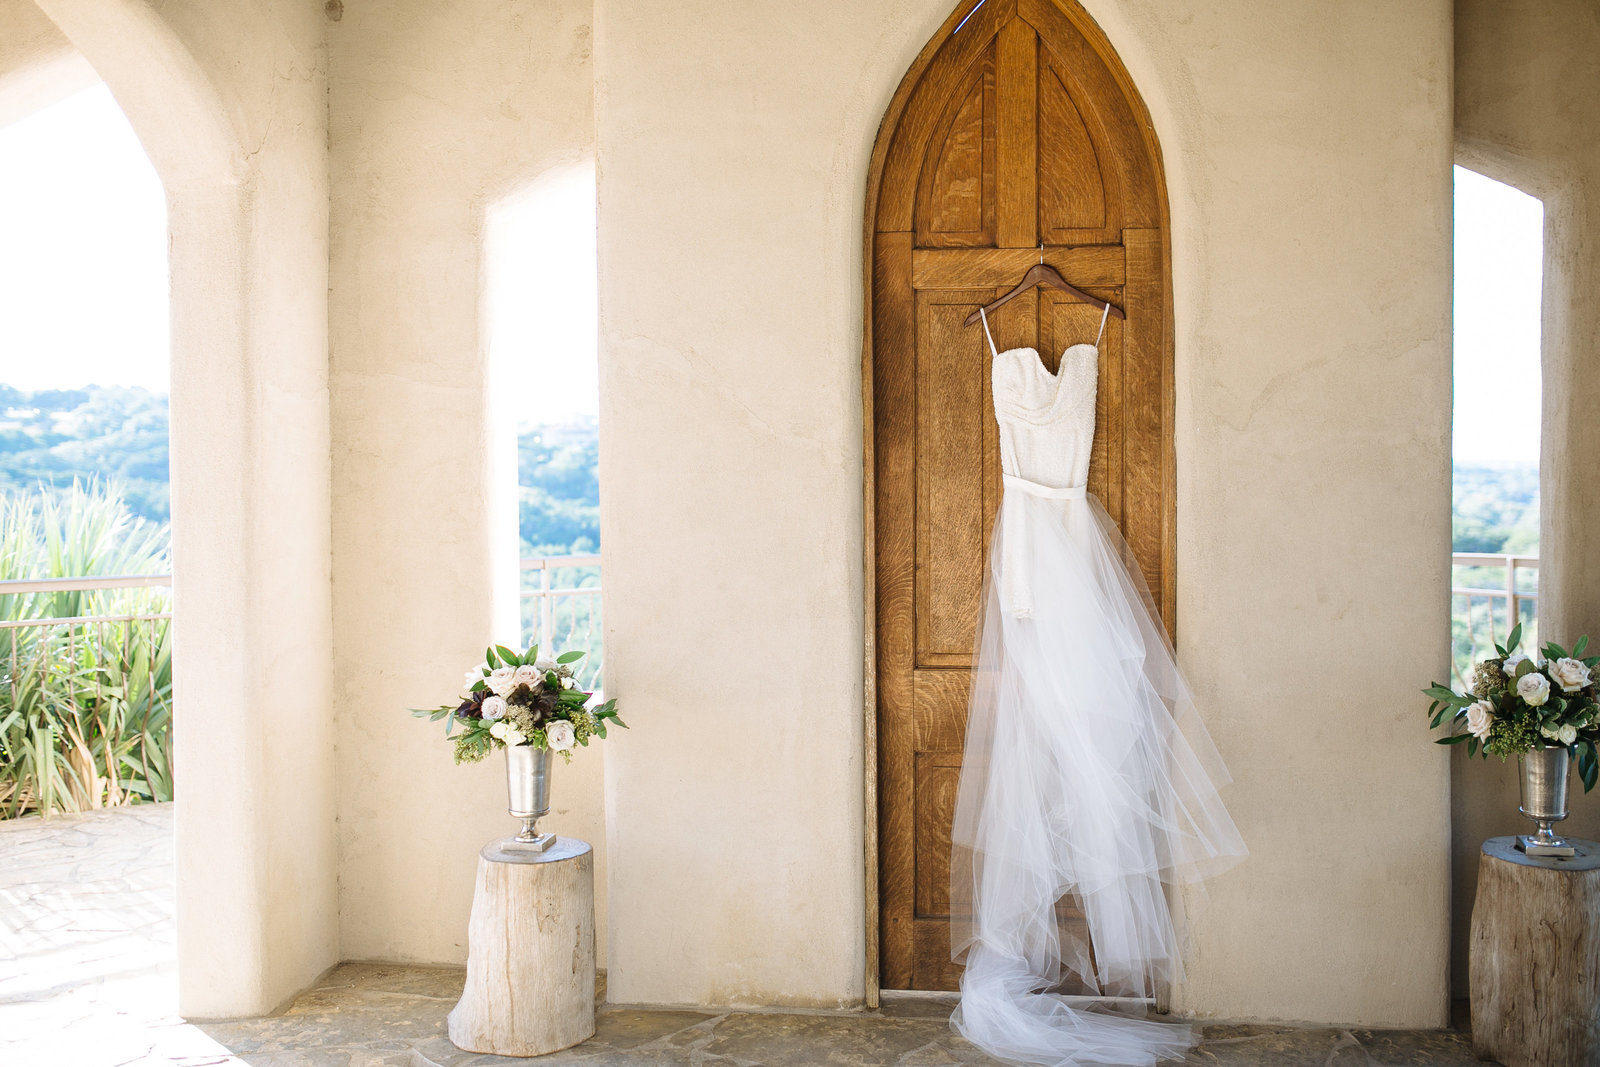 texas hill country wedding venue chapel dulcinea with wedding florals by flower shack blooms and wedding dress by pure magnolia photographed by houston wedding photographer